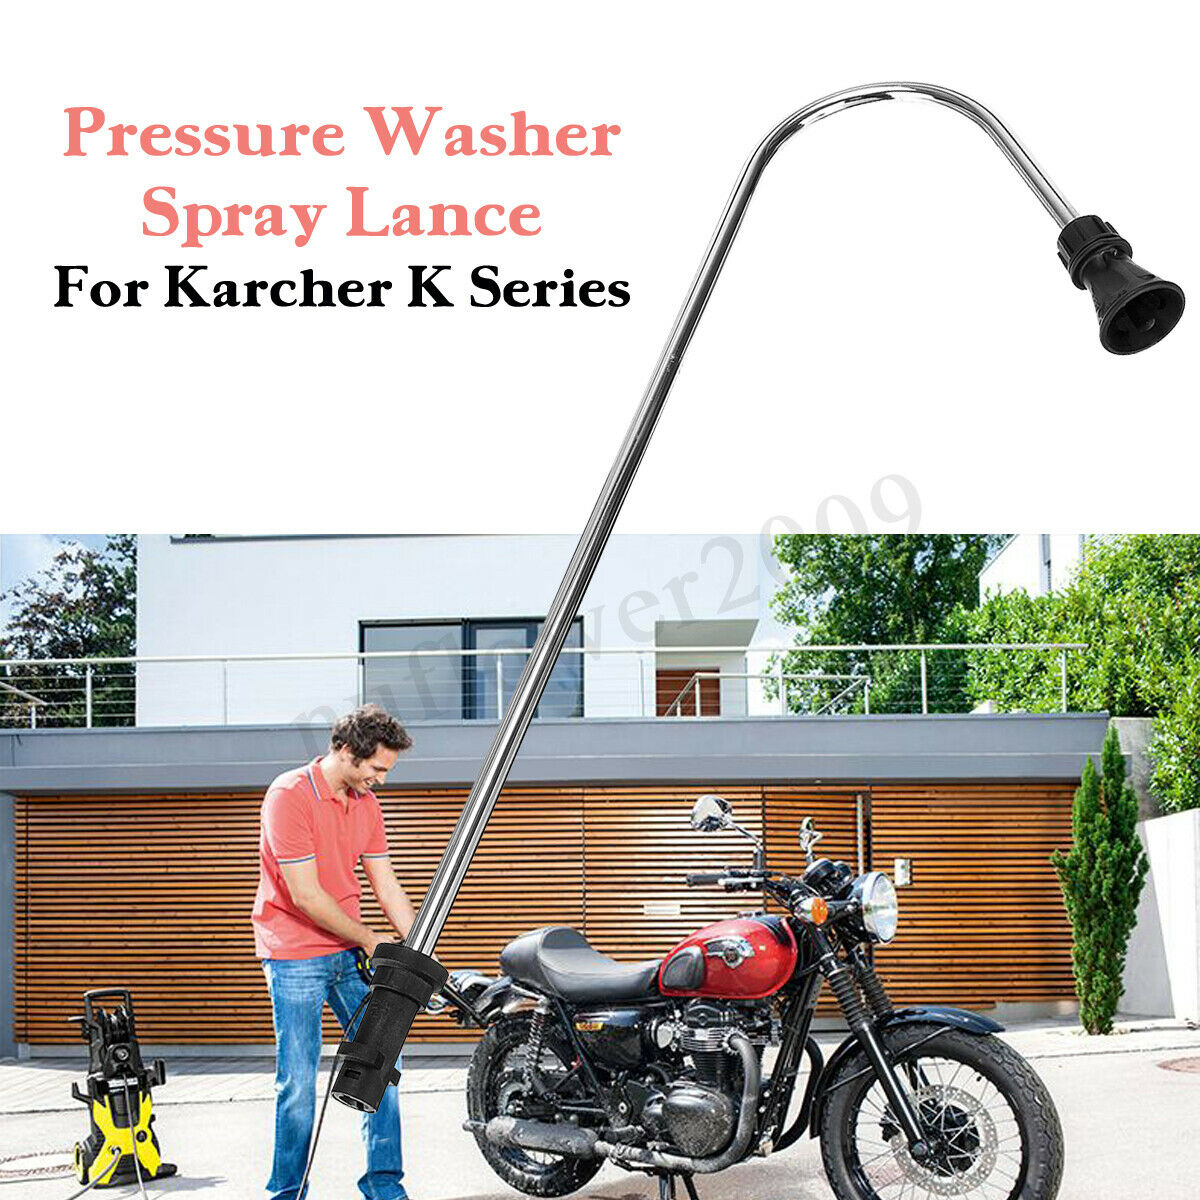 20" Pressure Washer 120 Angled Spray Lance Car Cleaning For Karcher K